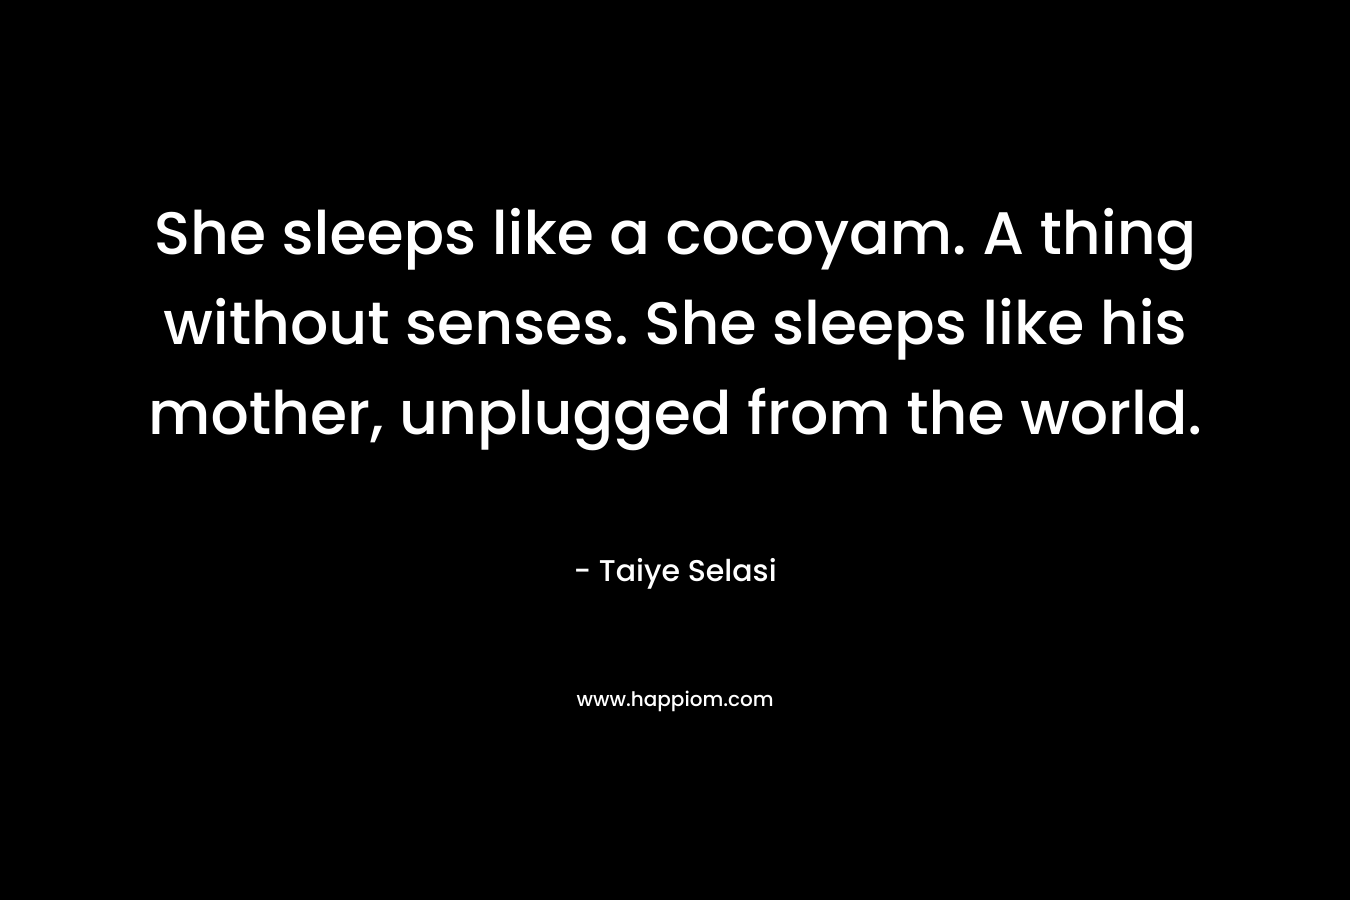 She sleeps like a cocoyam. A thing without senses. She sleeps like his mother, unplugged from the world.